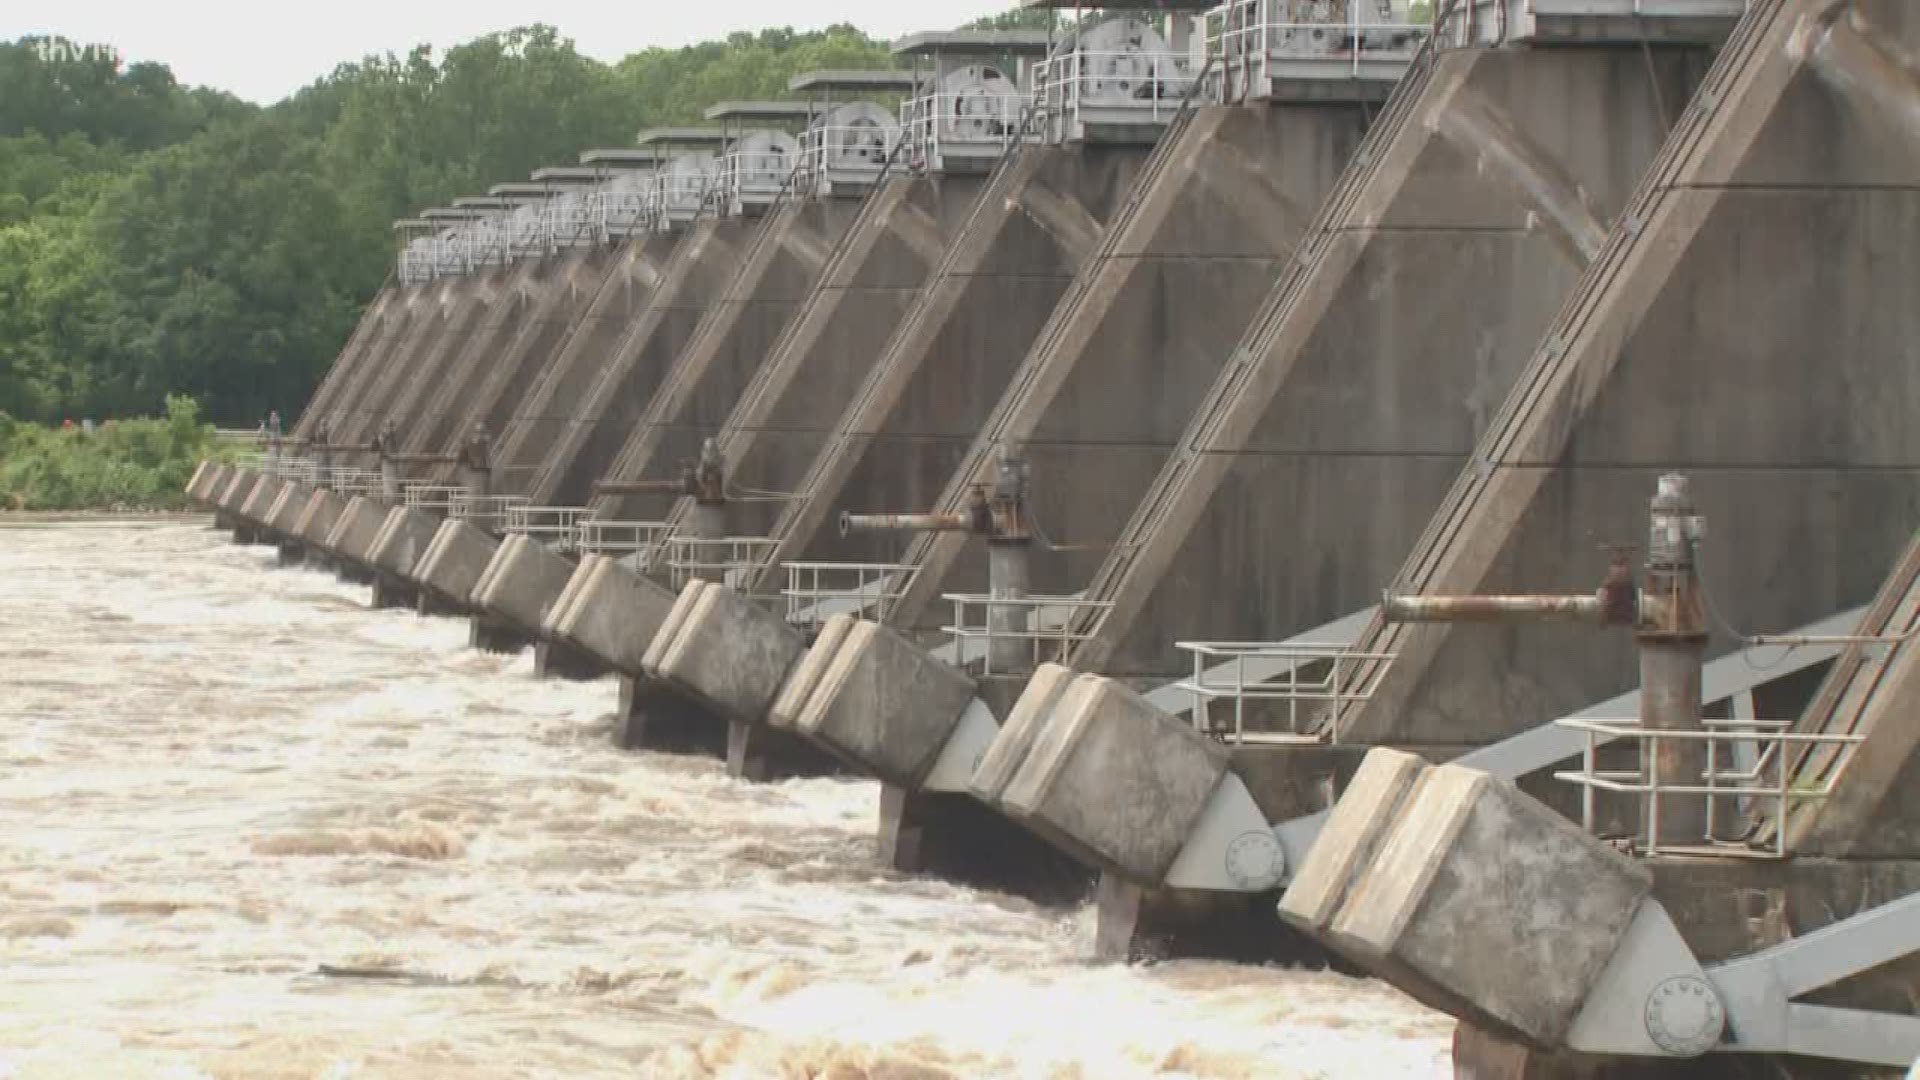 The operators at David D. Terry Lock and Dam in Scott, Arkansas are preparing by removing a lot of electrical and mechanical equipment that could be put underwater due to flooding.